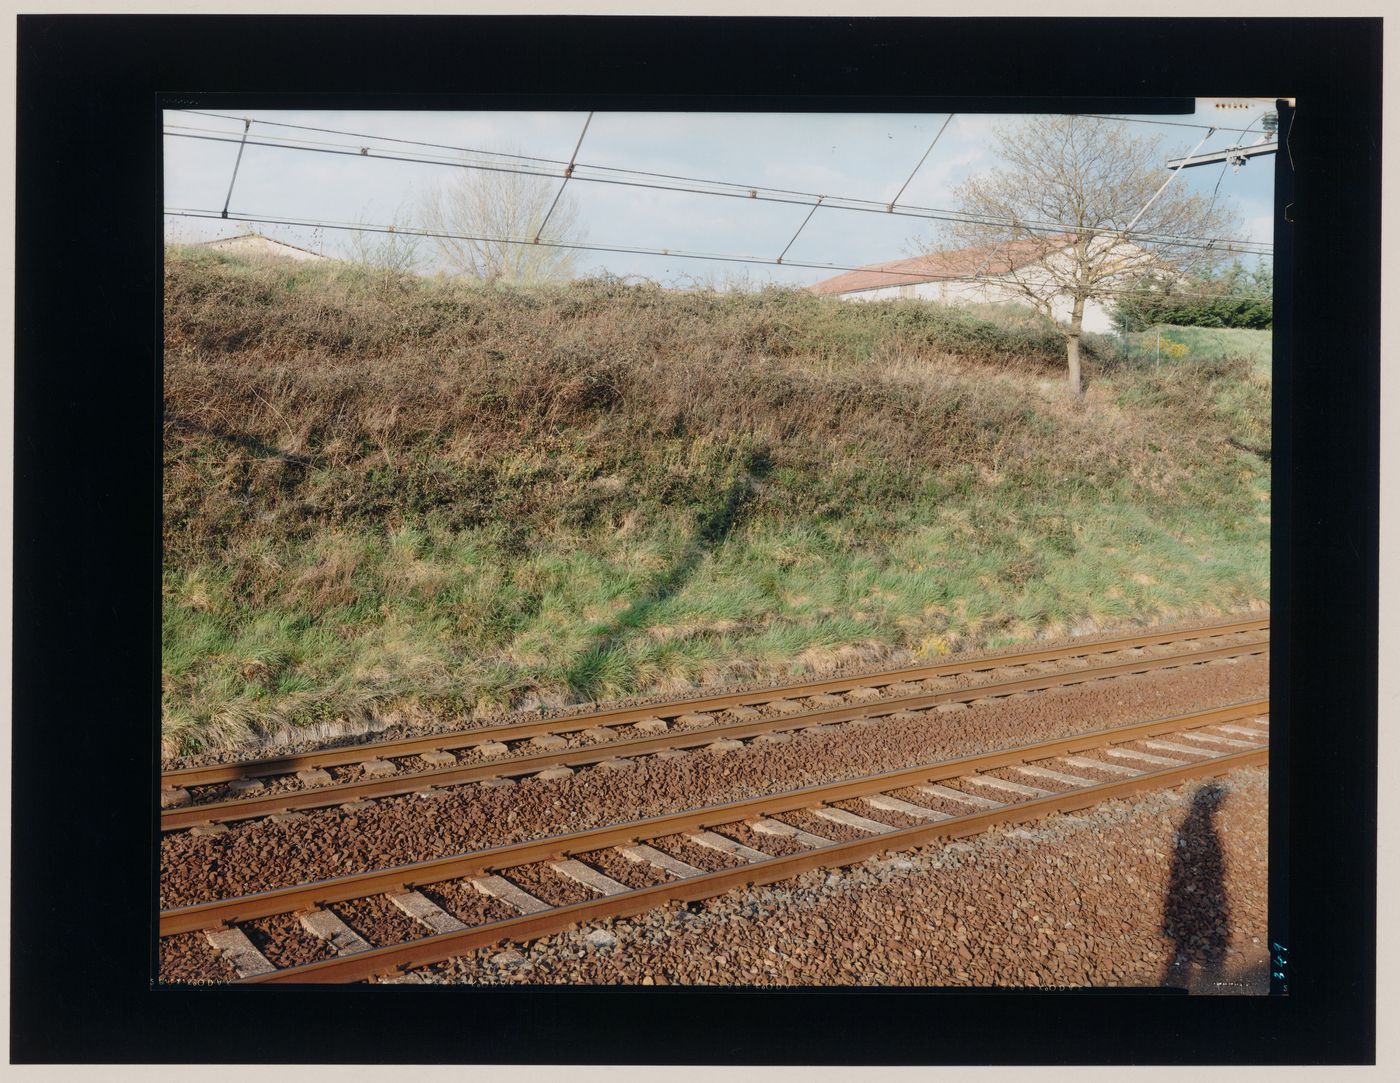 View of tracks and overhead wires for an electric railway, a grassy slope and a person's cast shadow, Orthez, France (from the series "In between cities")